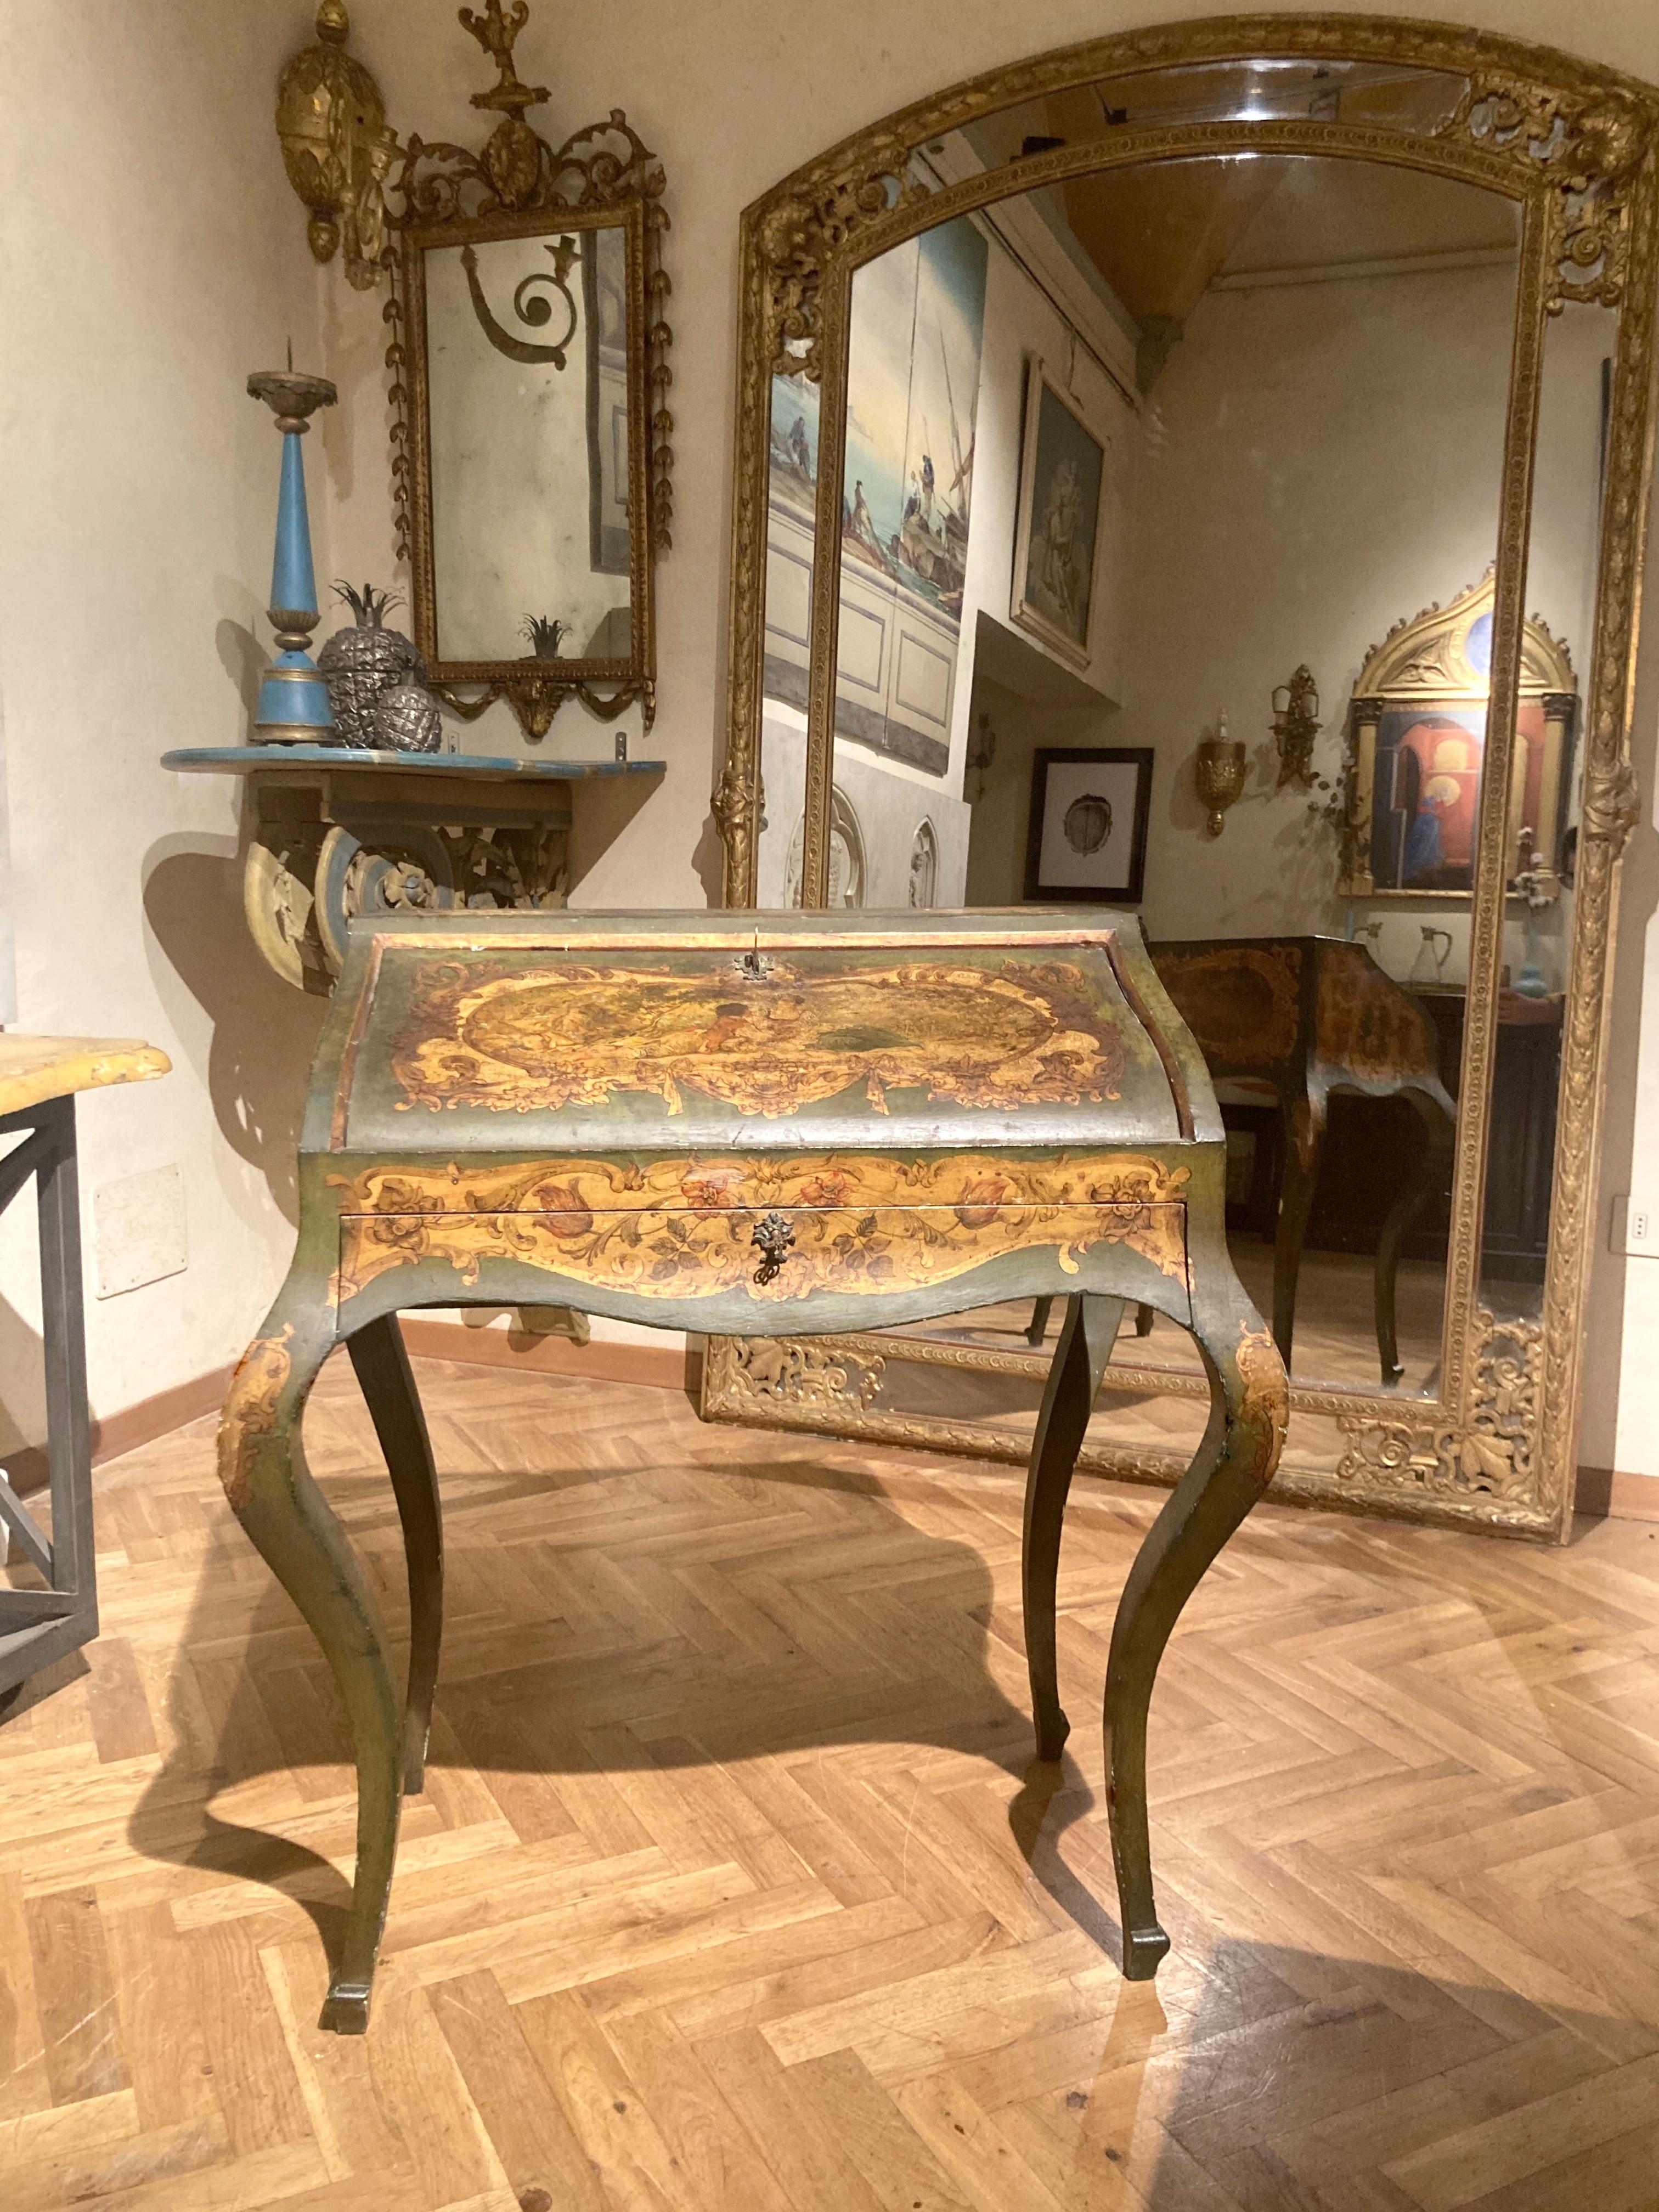 This lovely petite Italian Louis XV style slant-top writing desk is entirely decorated with hand painted lacquer featuring genre scenes, floral paintings and putto so fashionable during the Venetian rococo period. The writing table - wonderfully